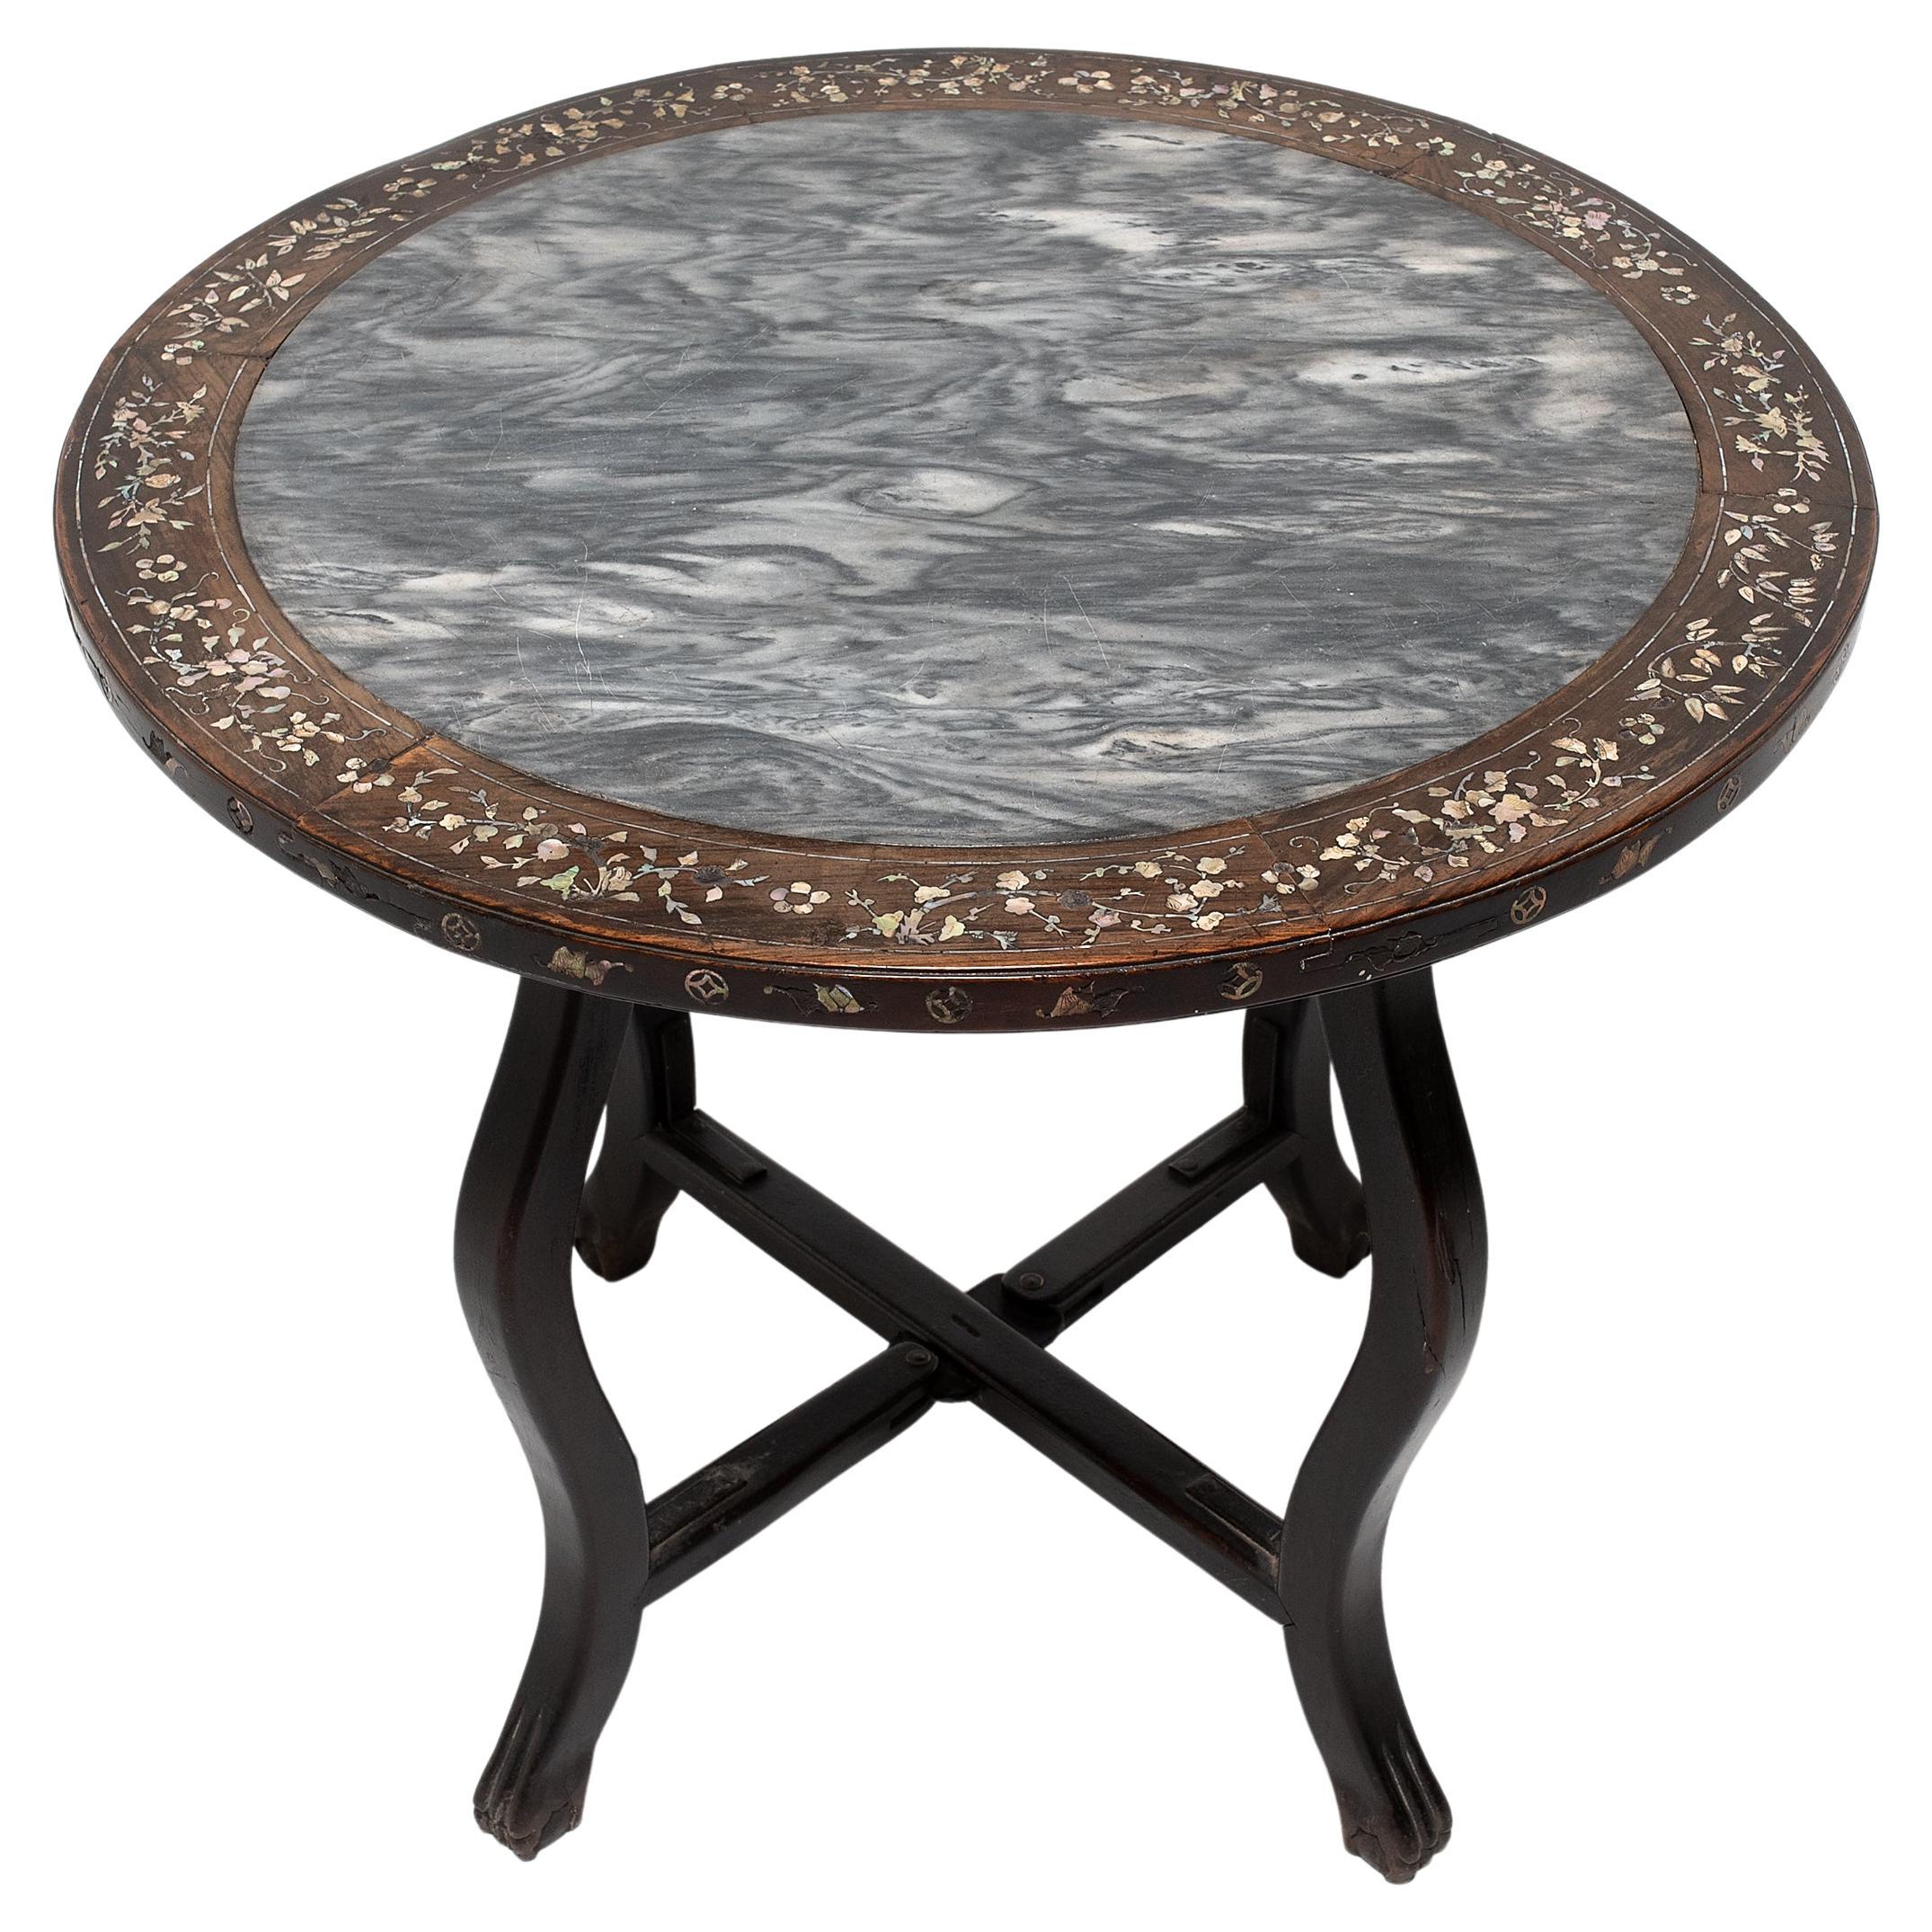 Details about   14 Inch Marble Coffee Table Top Octagon Bed Side Table Inlay with Vintage Craft 